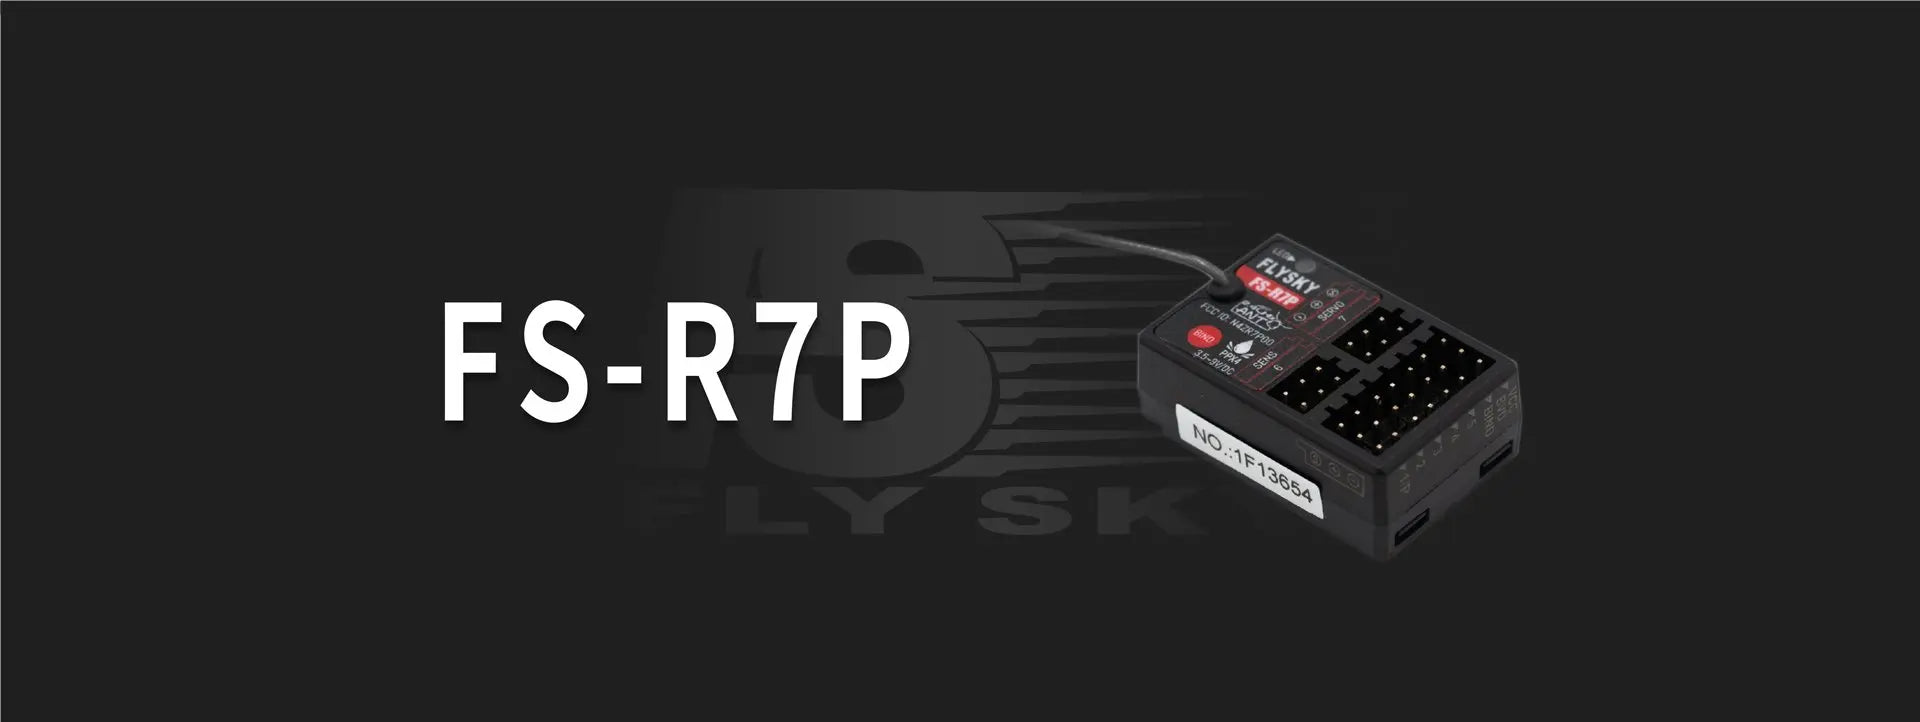 Flysky 2.4G ANT Protocol Receiver, 1/10 crawler, on-road car, off-road short course truck, and truck